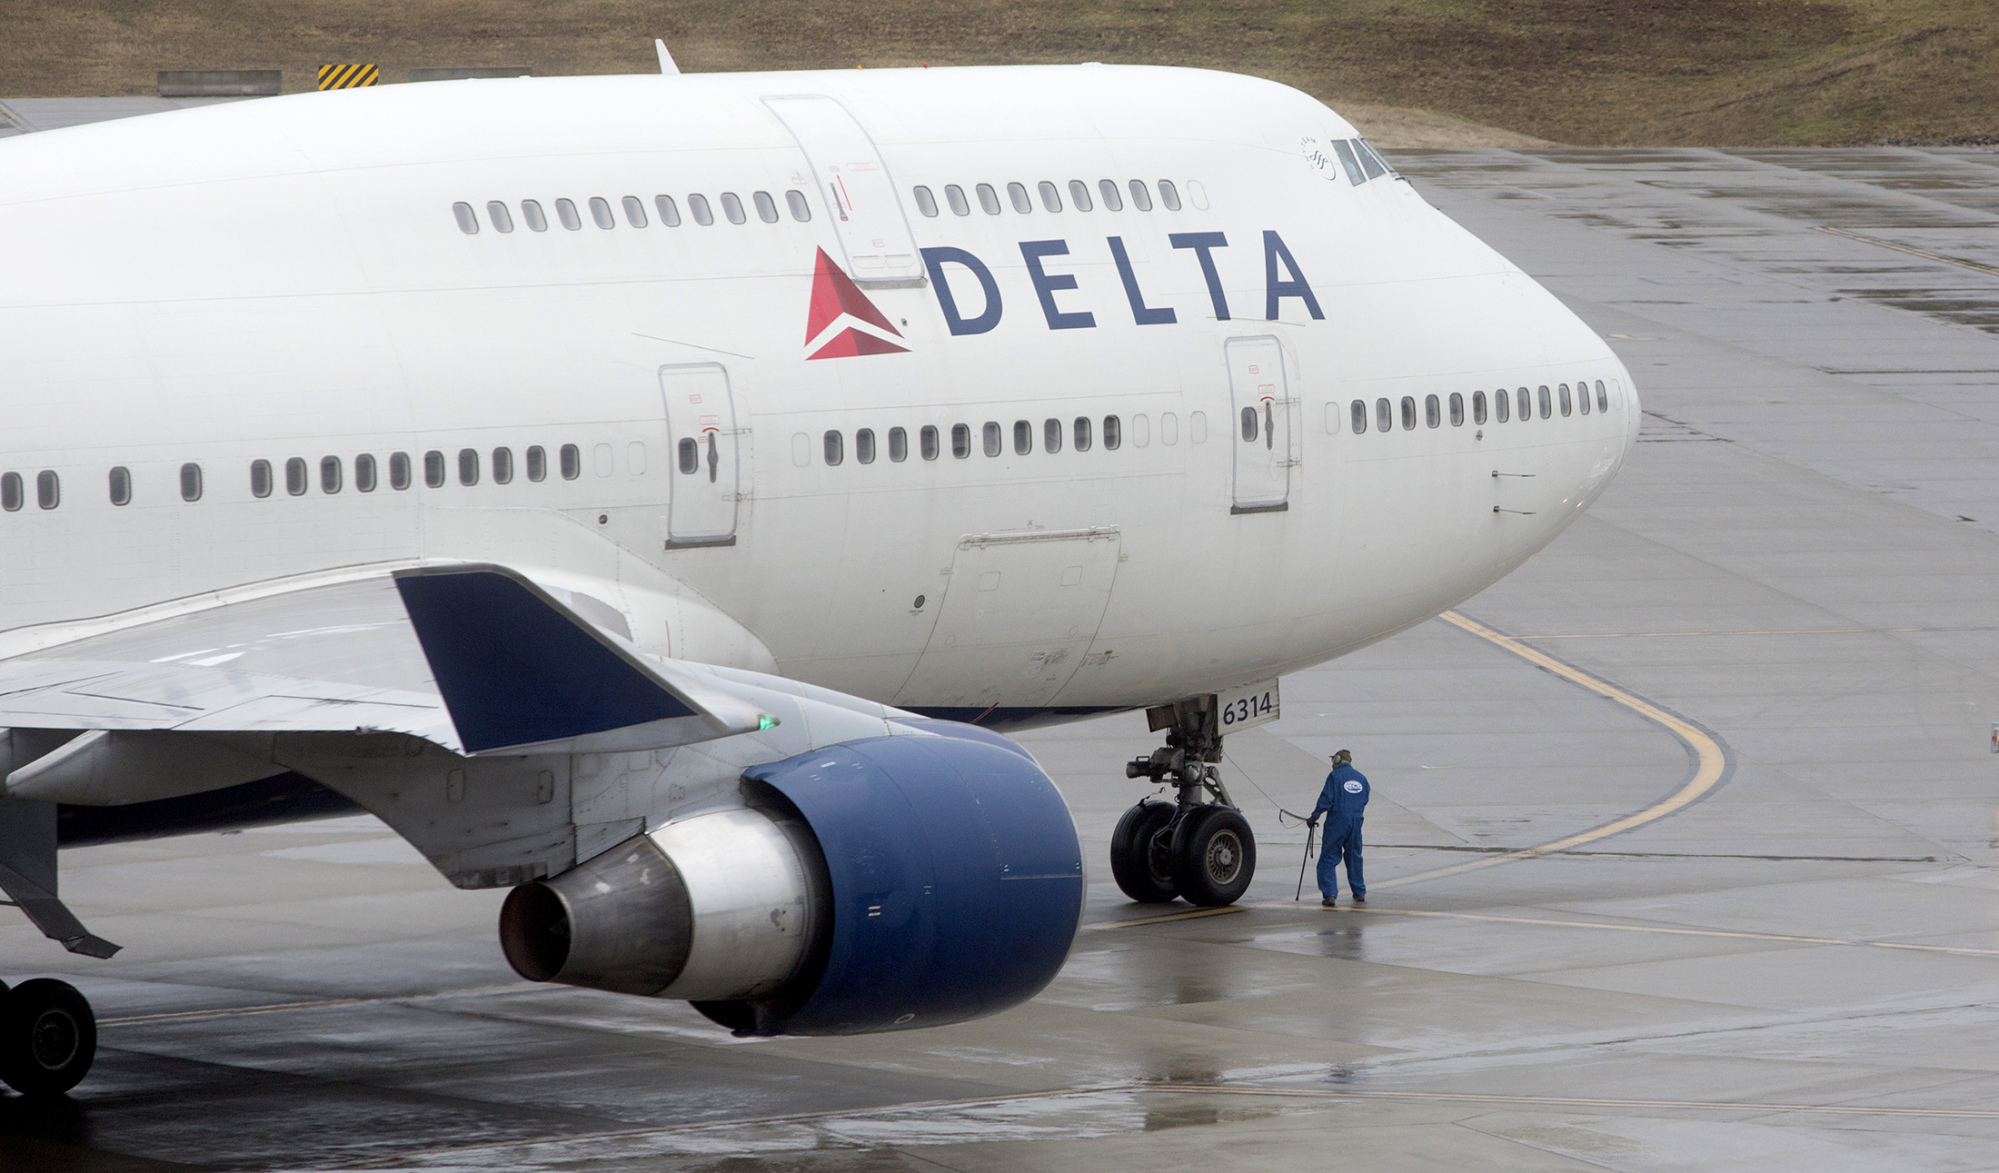 Delta Air Lines Inc. Holds Farewell Tour For The 747-400 Airplane